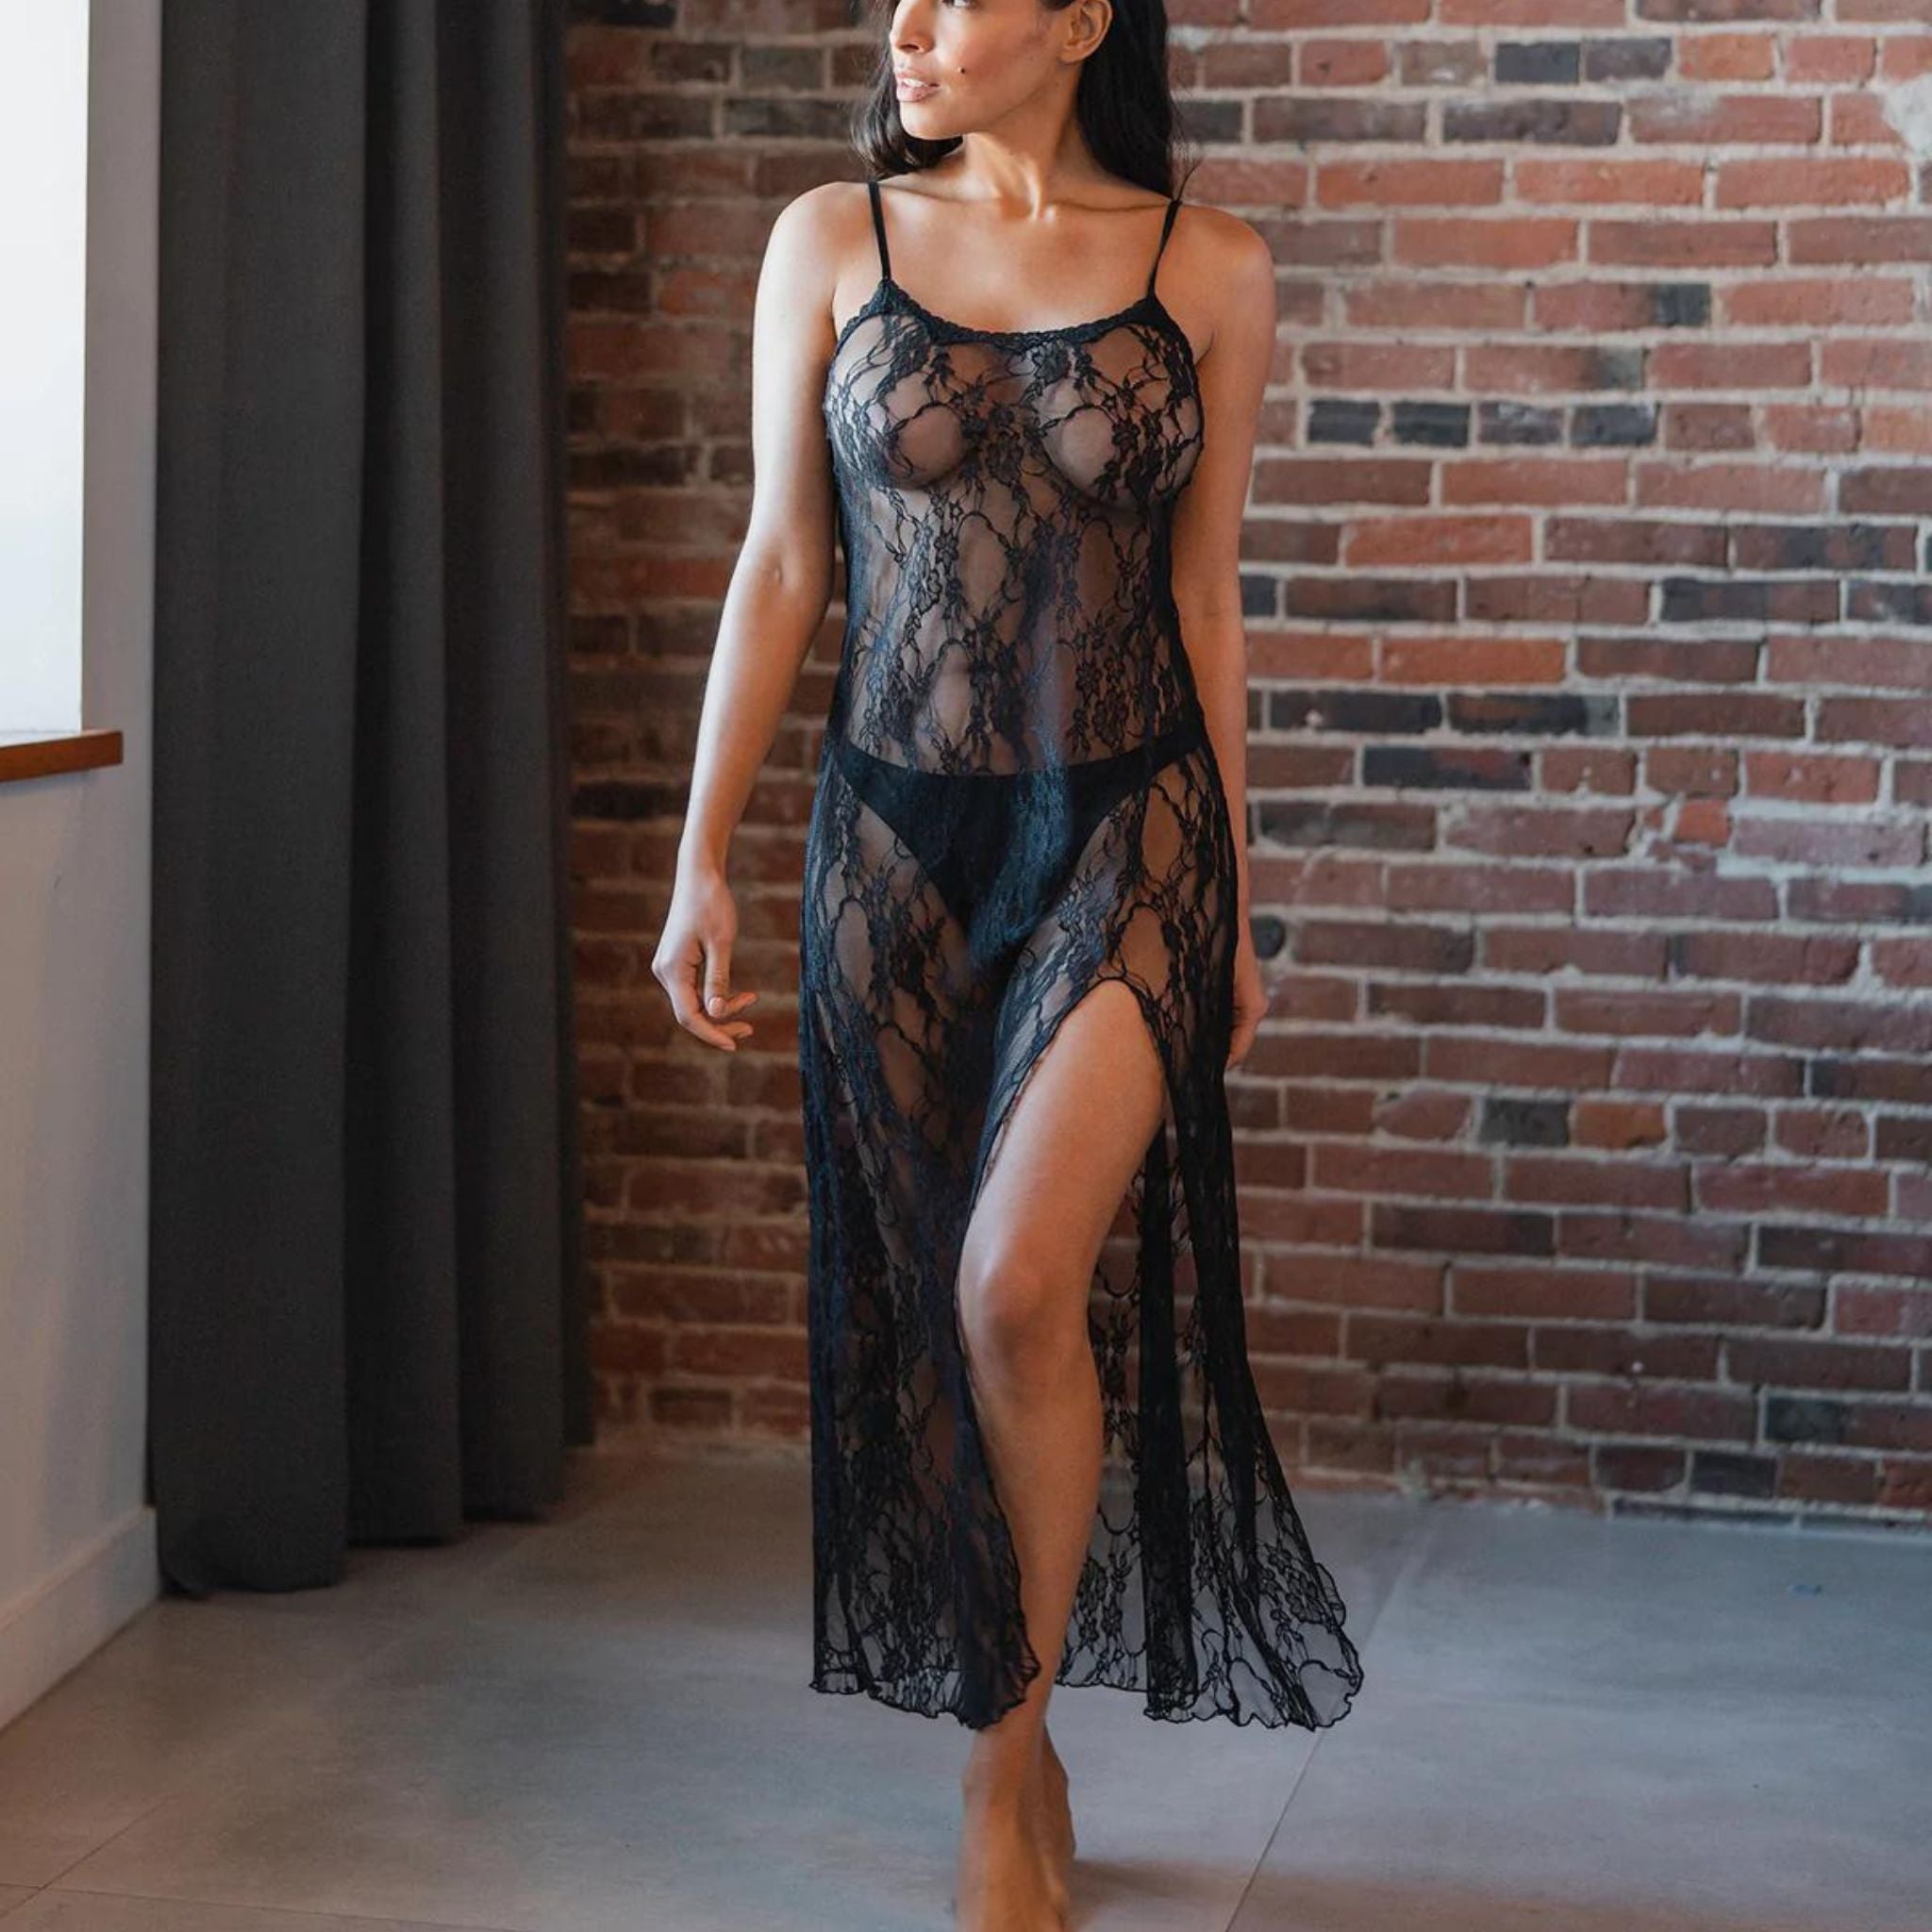 A classically sexy maxi lace chemise that leaves temptingly little to the imagination. Featuring a round neckline, thin straps, a lace trimmed top and a 48" length with a merrow finished edge. Constructed from a delicate floral lace.  Fabric: 95% Nylon 5% Elastane  Machine wash. Delicate cycle. Hang to dry.  Made in Canada